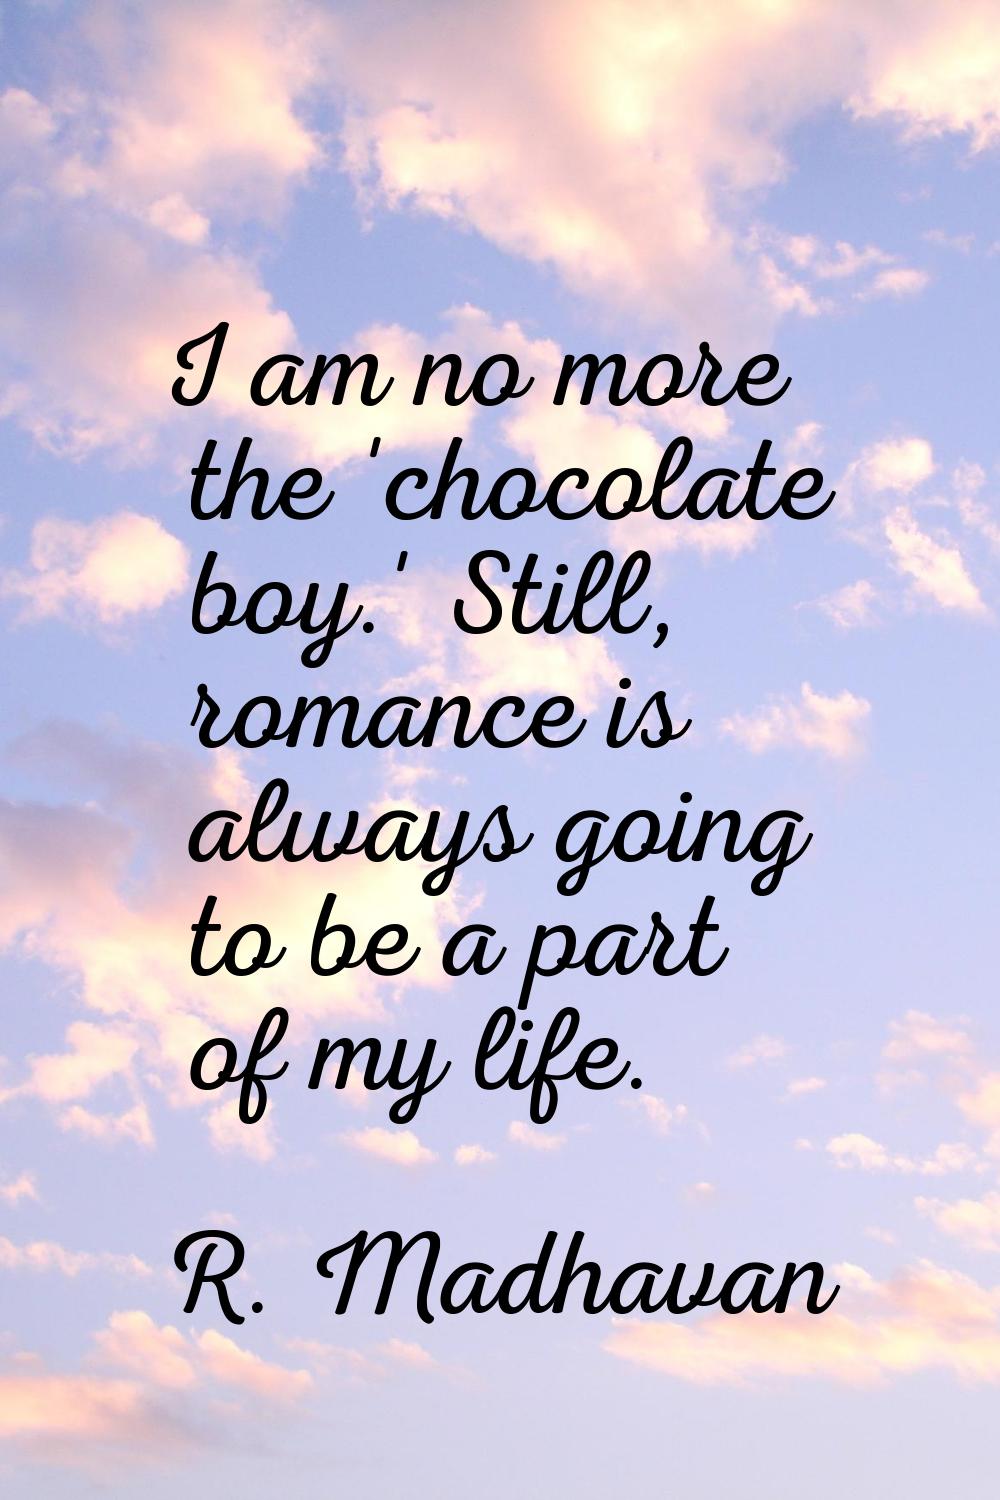 I am no more the 'chocolate boy.' Still, romance is always going to be a part of my life.